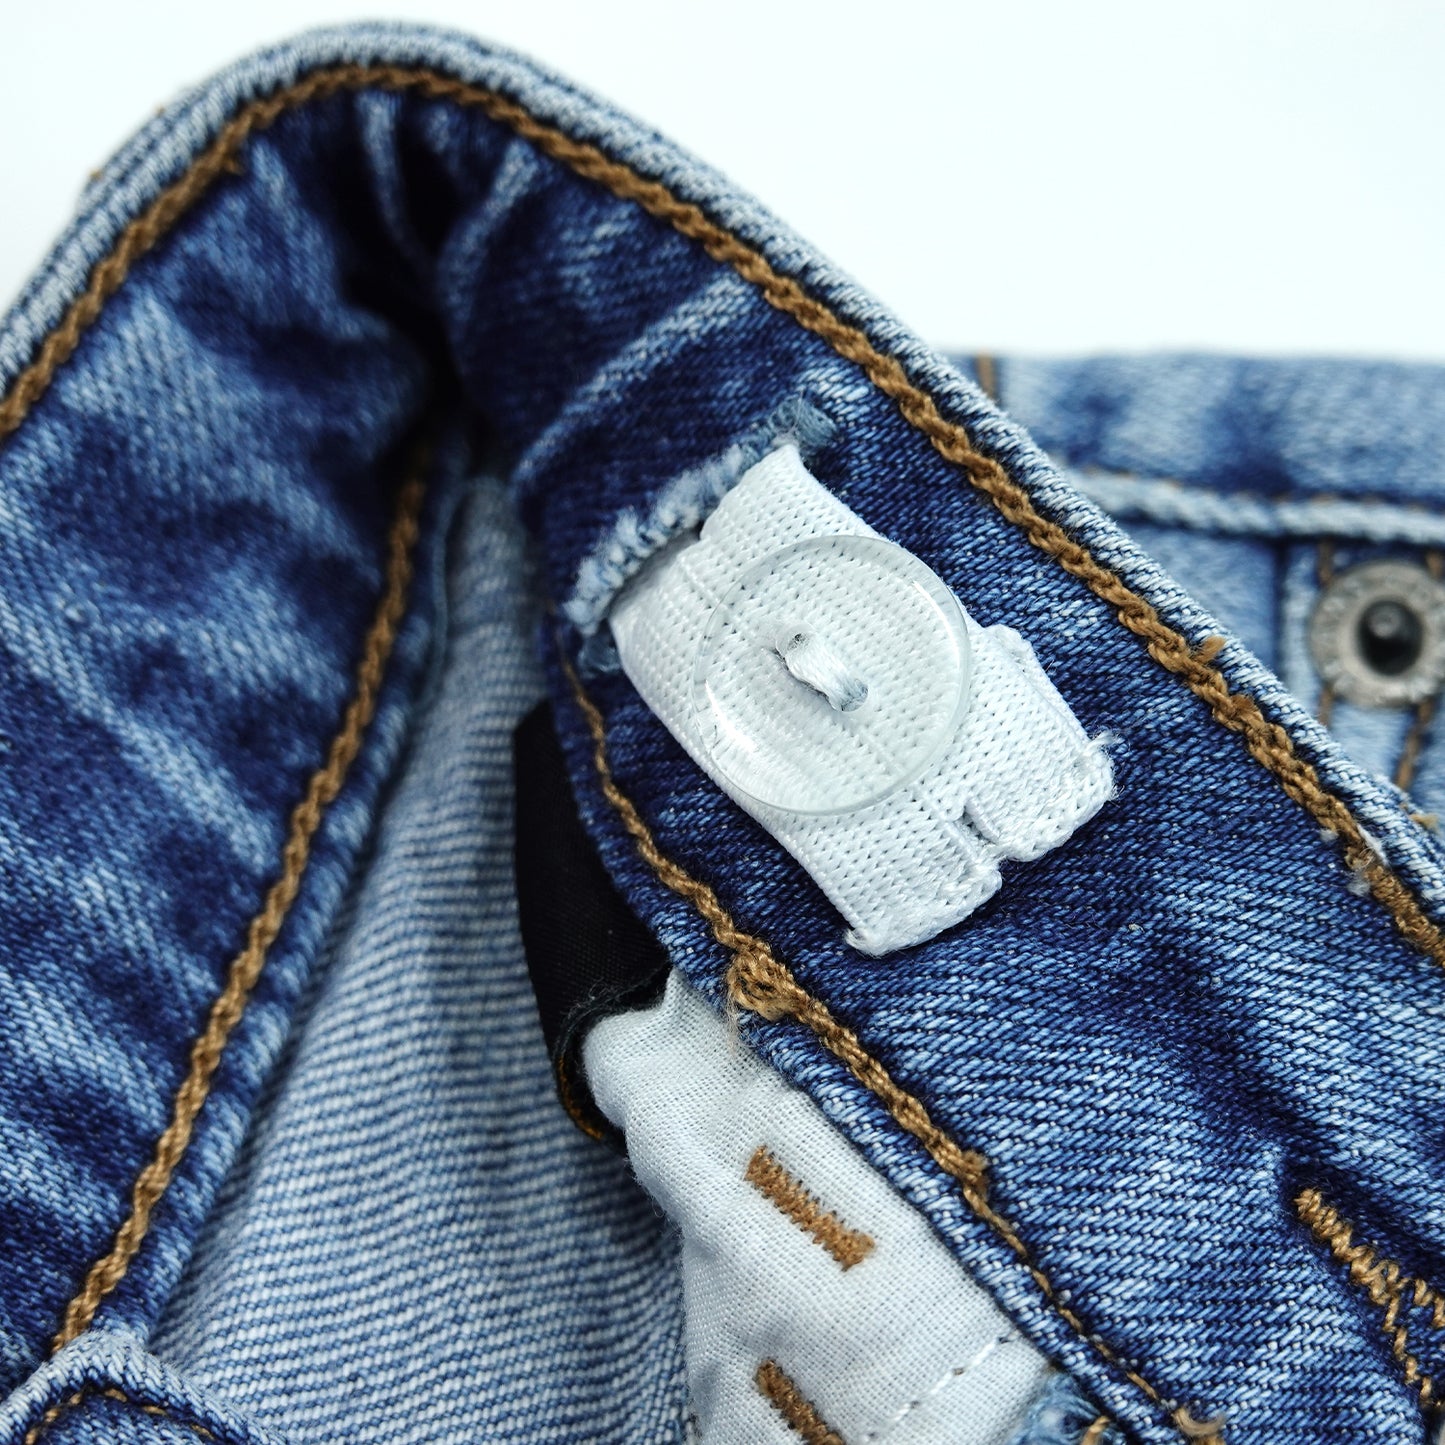 Infant Jeans,Baby Toddler Elastic Band Inside with D-ring Damaged Fashion Soft Stretch Denim Pants